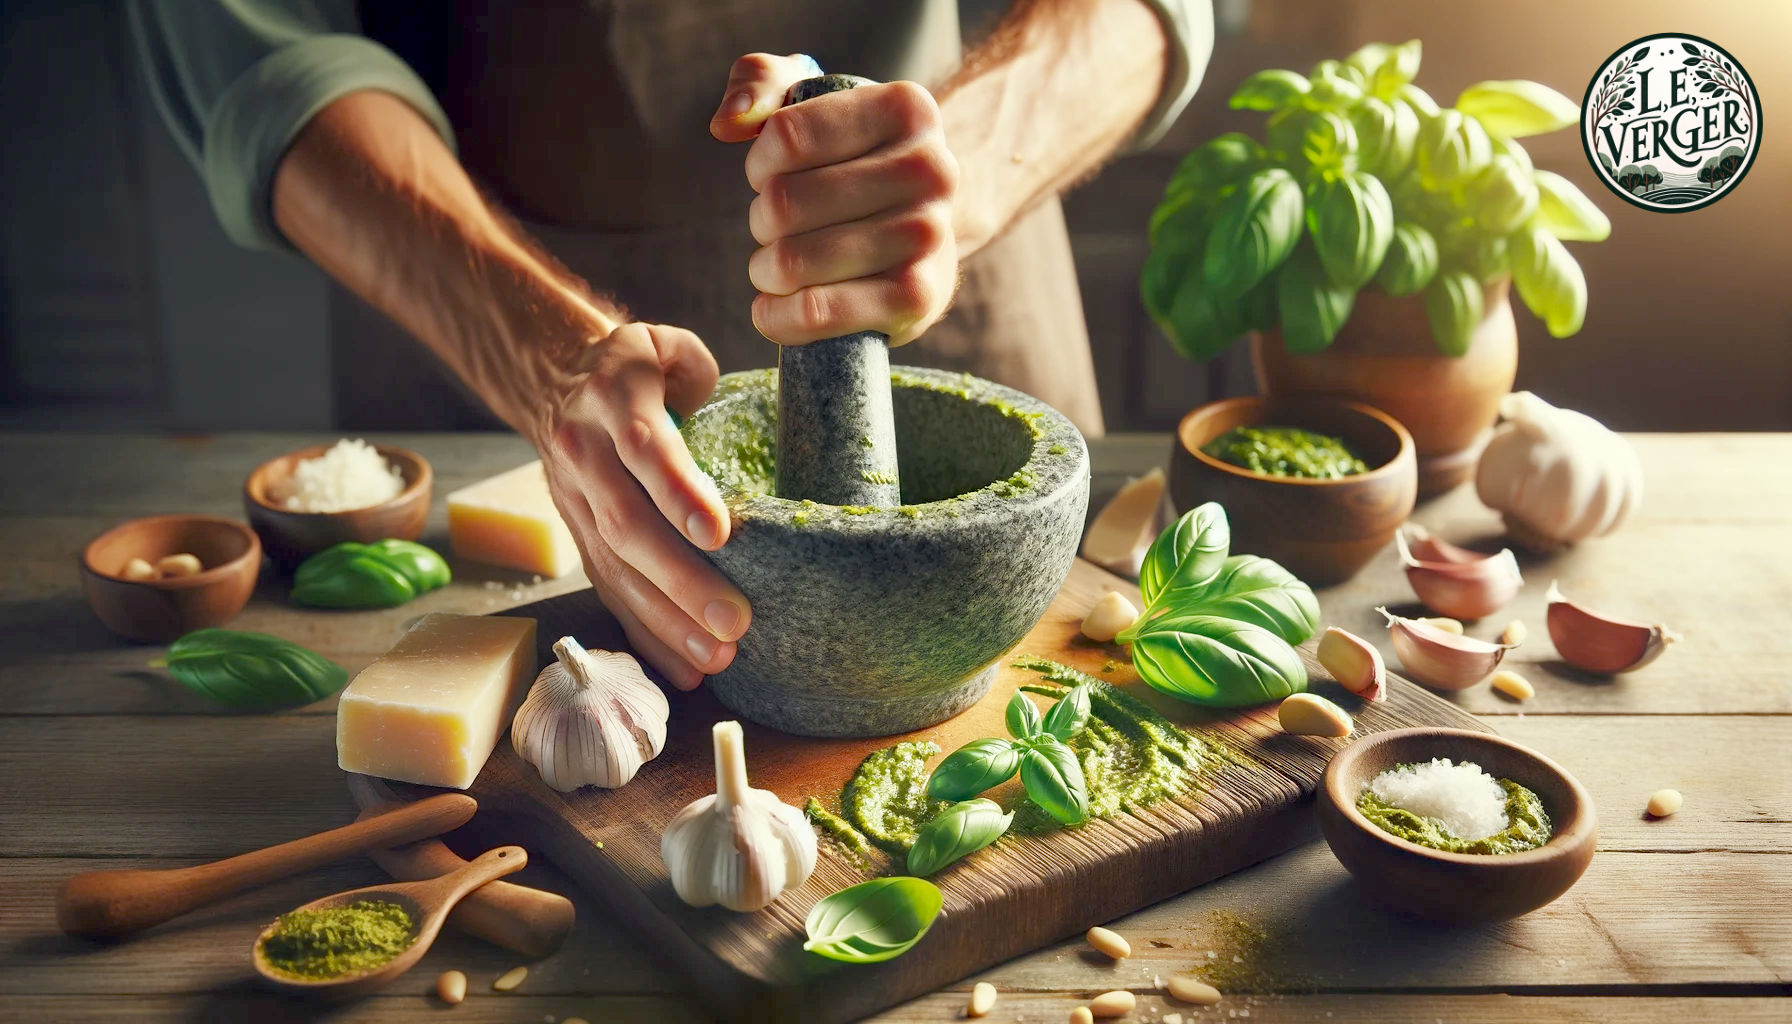 Cooking with Basil and making pesto